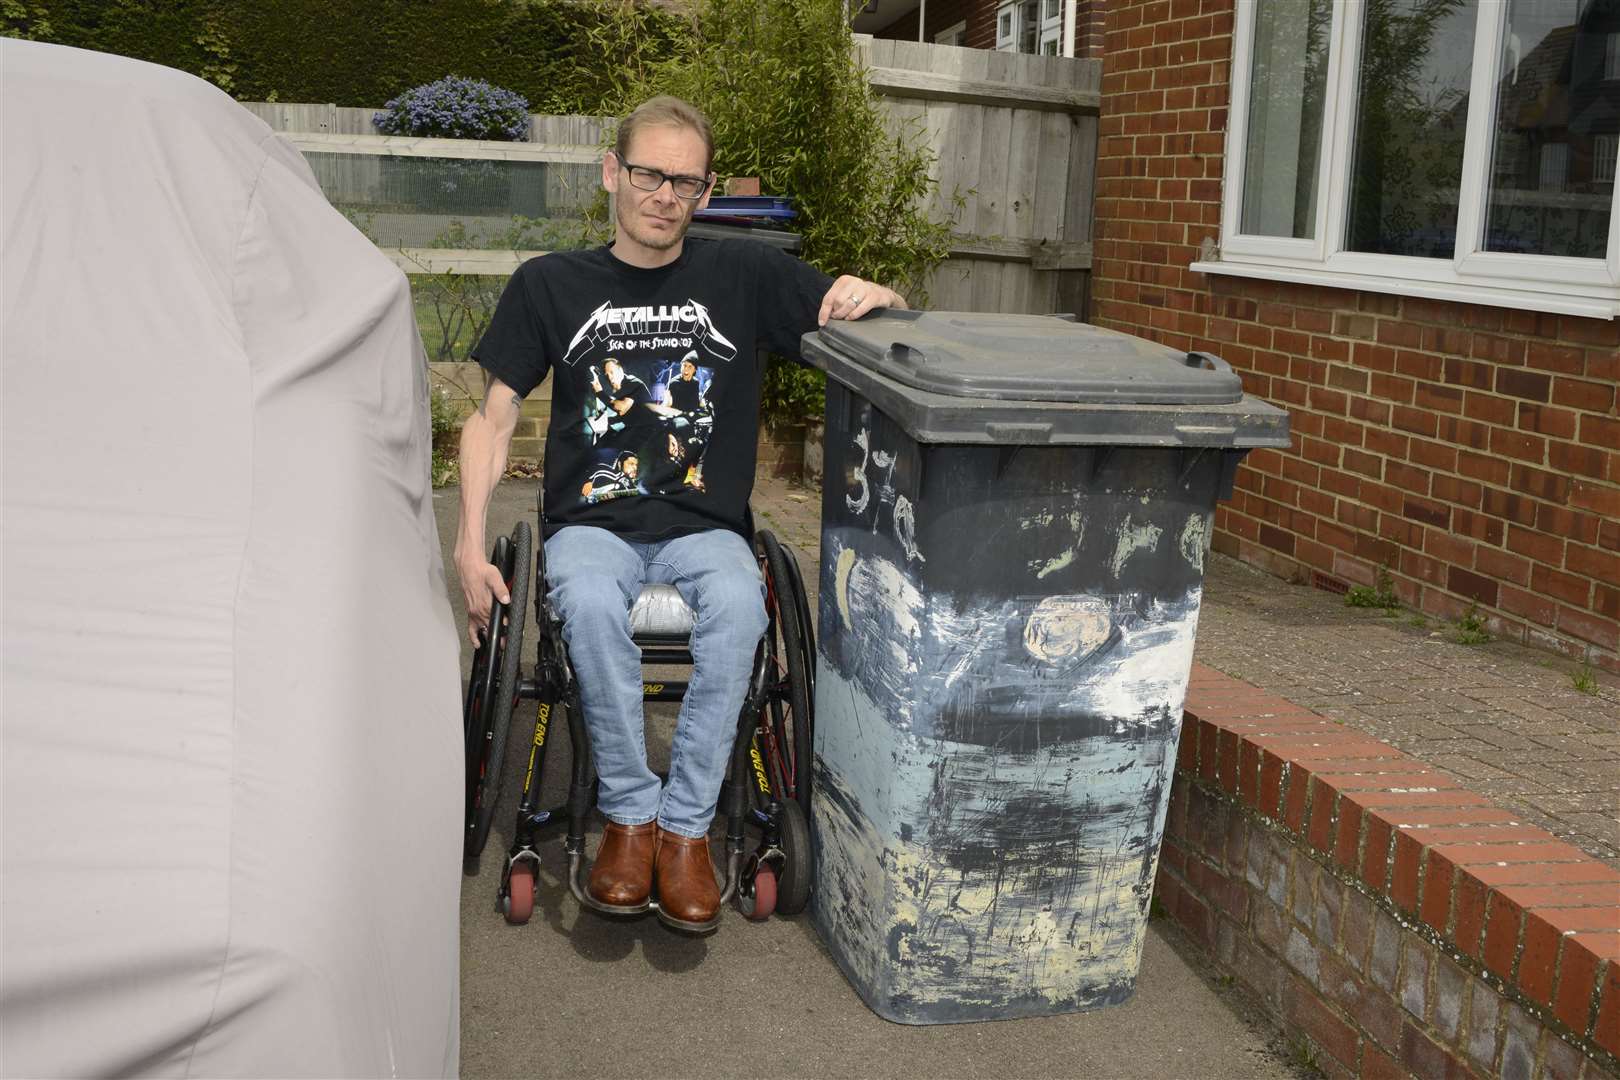 Mike Beeforth has difficulty getting past his waste bin